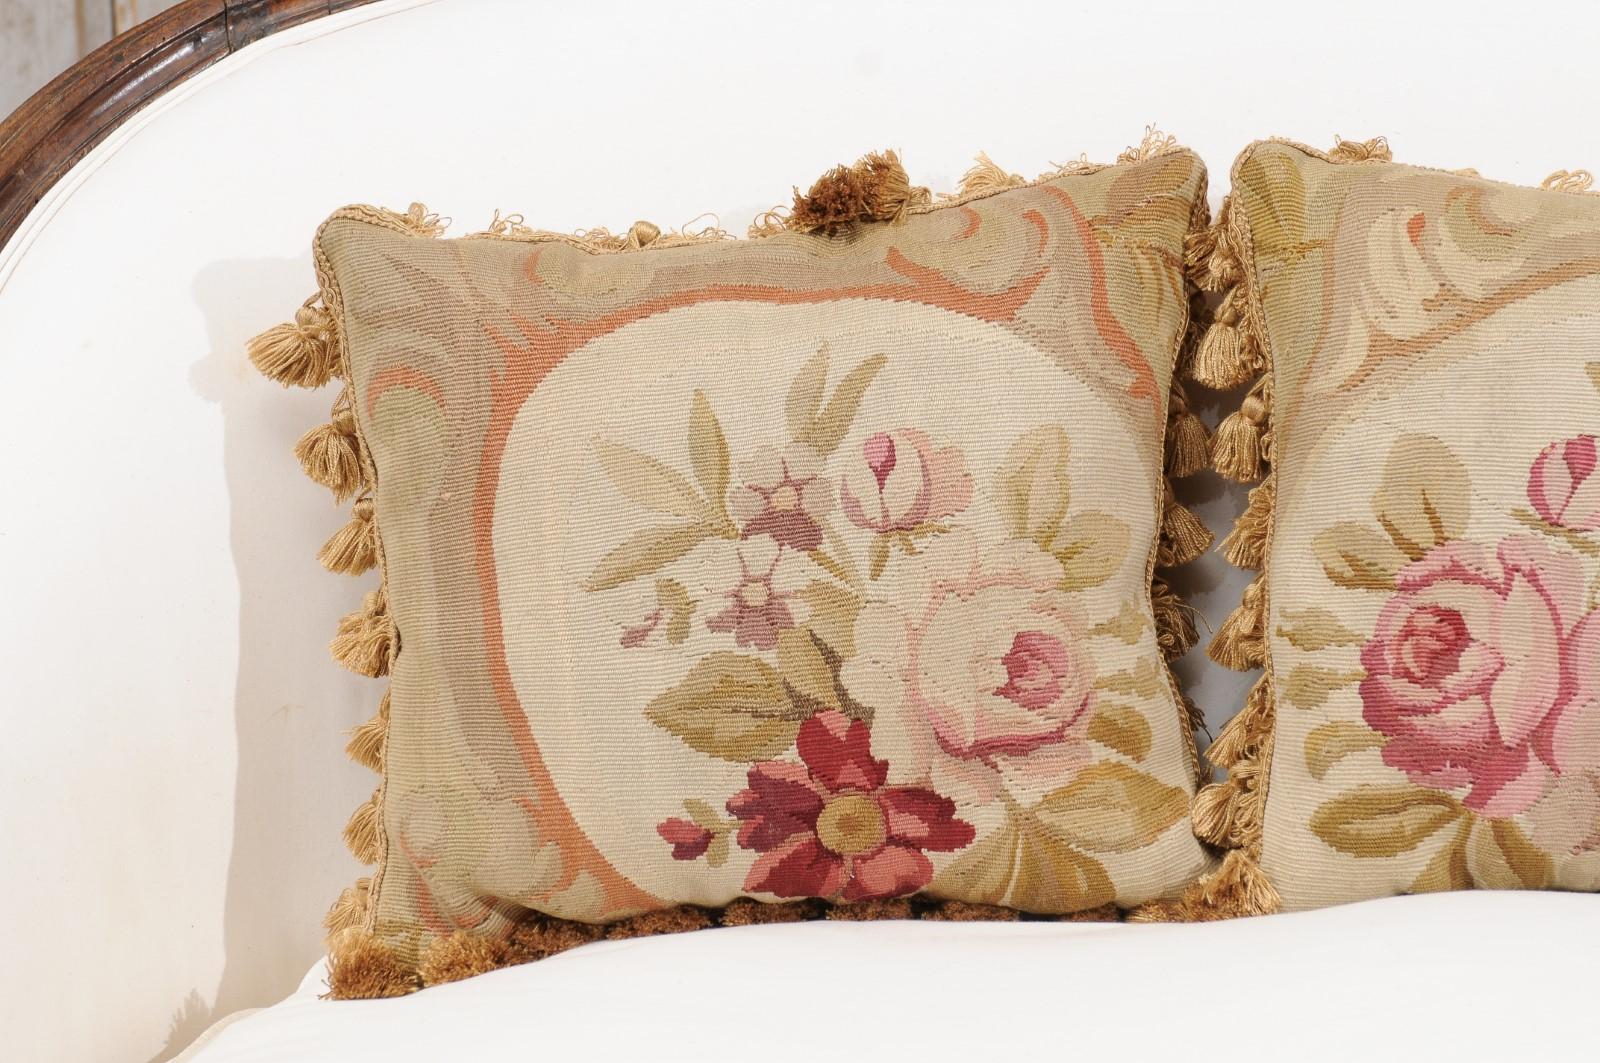 French 19th Century Aubusson Woven Tapestry Pillow with Roses and Tassels In Good Condition For Sale In Atlanta, GA